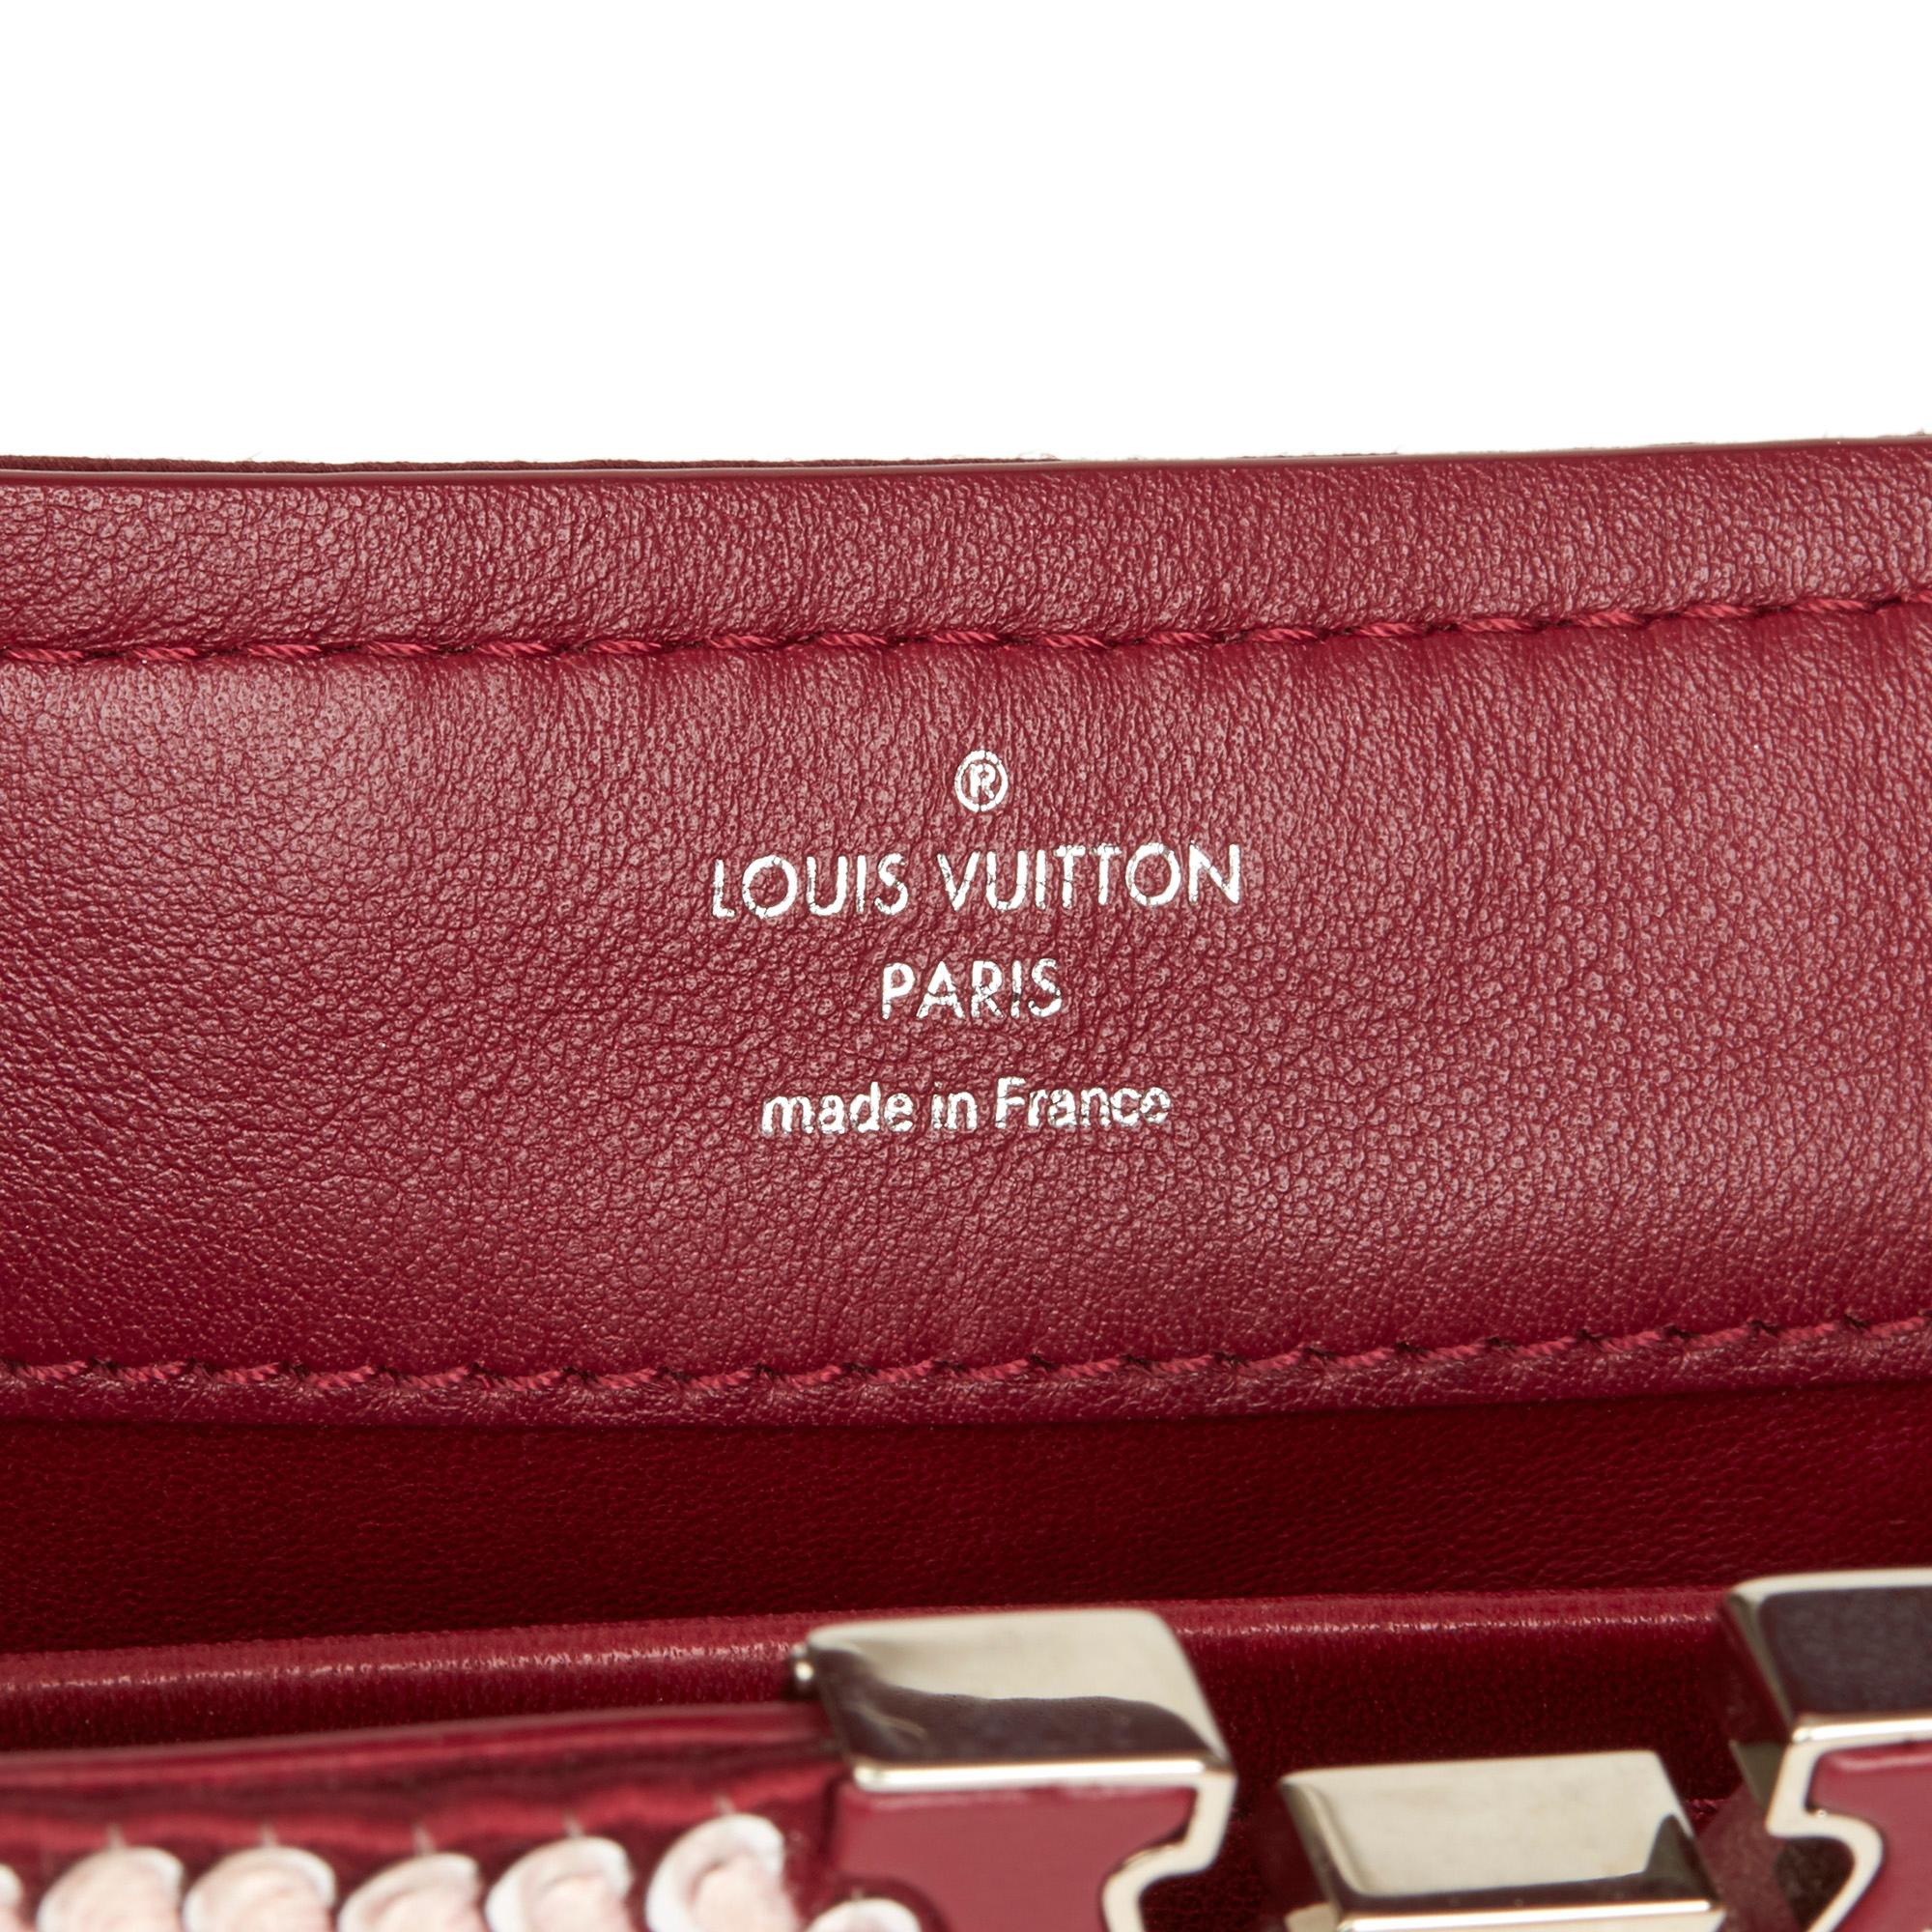 2016 Louis Vuitton Burgundy Sequin Embellished Smooth Calfskin Leather Capucines 2